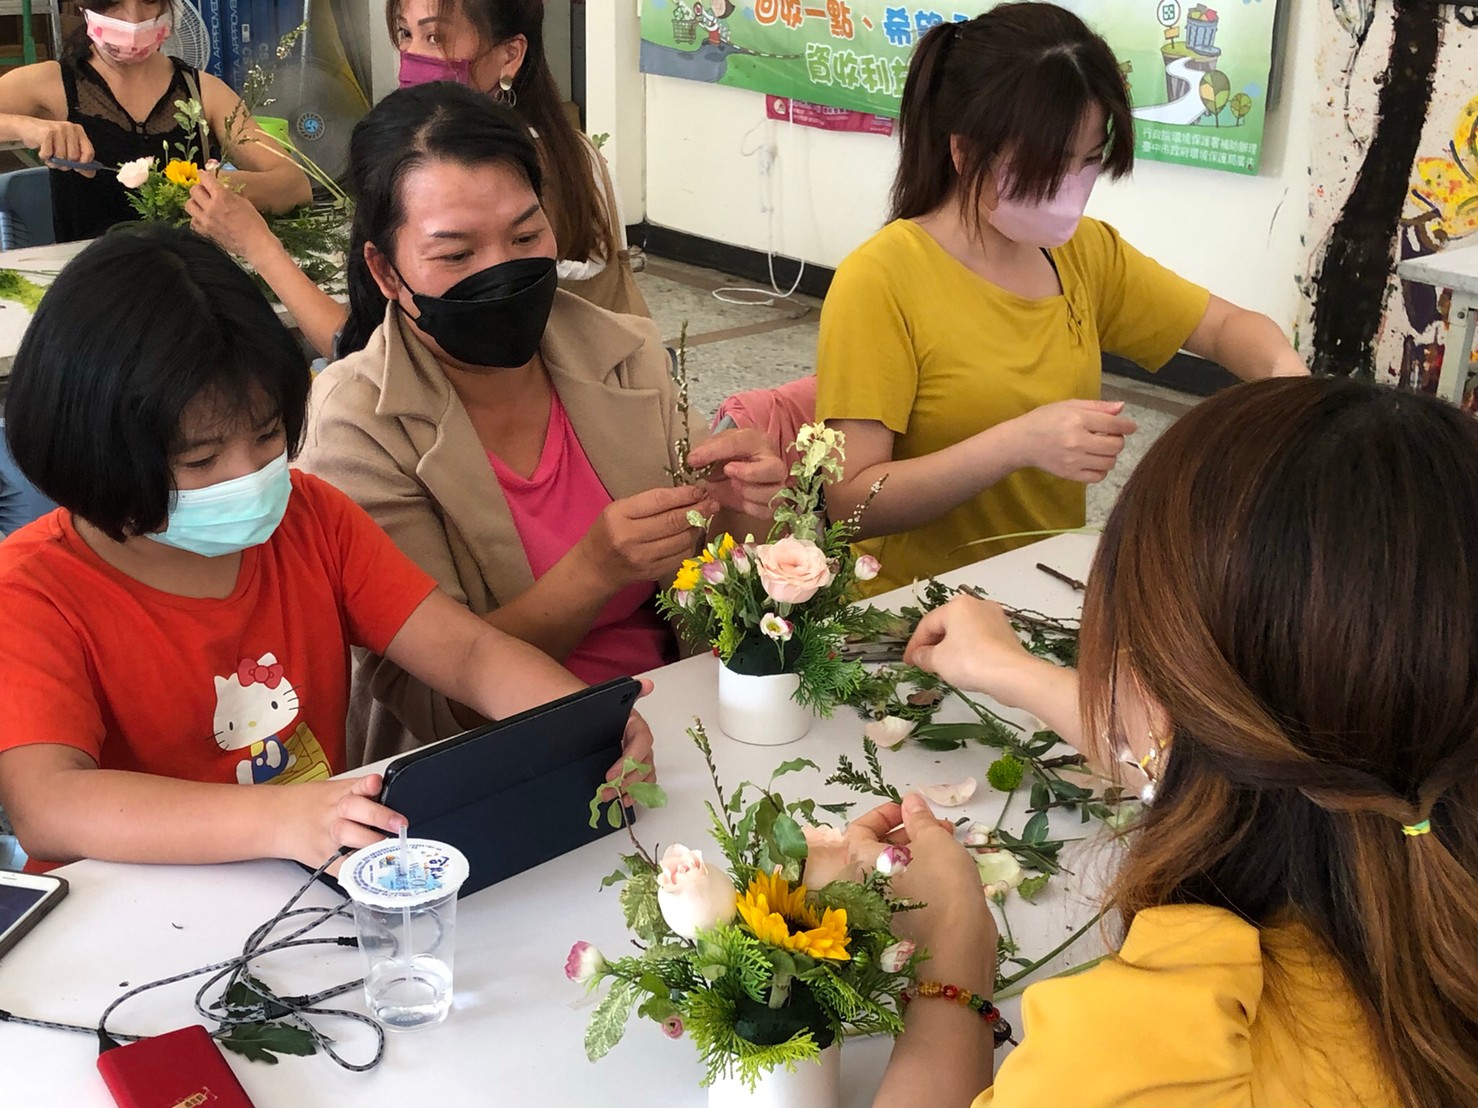 Taichung city held workshops to assist immigrants in entering workforce. (Photo / Provided by Labor Affairs Bureau, Taichung city)